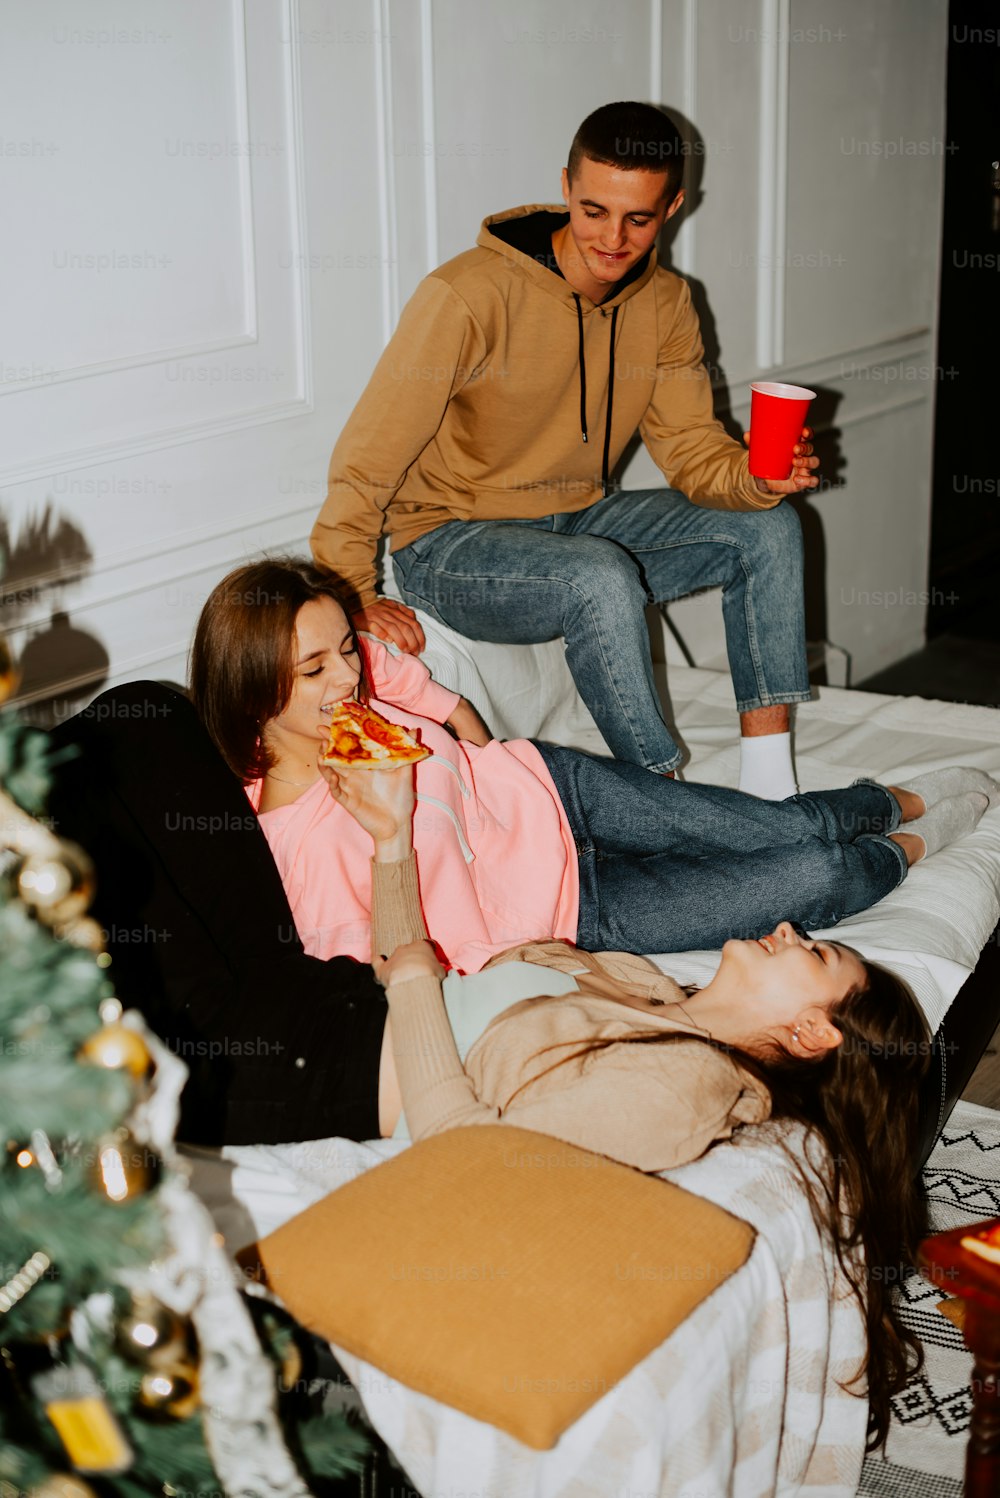 a man and a woman sitting on a bed eating pizza